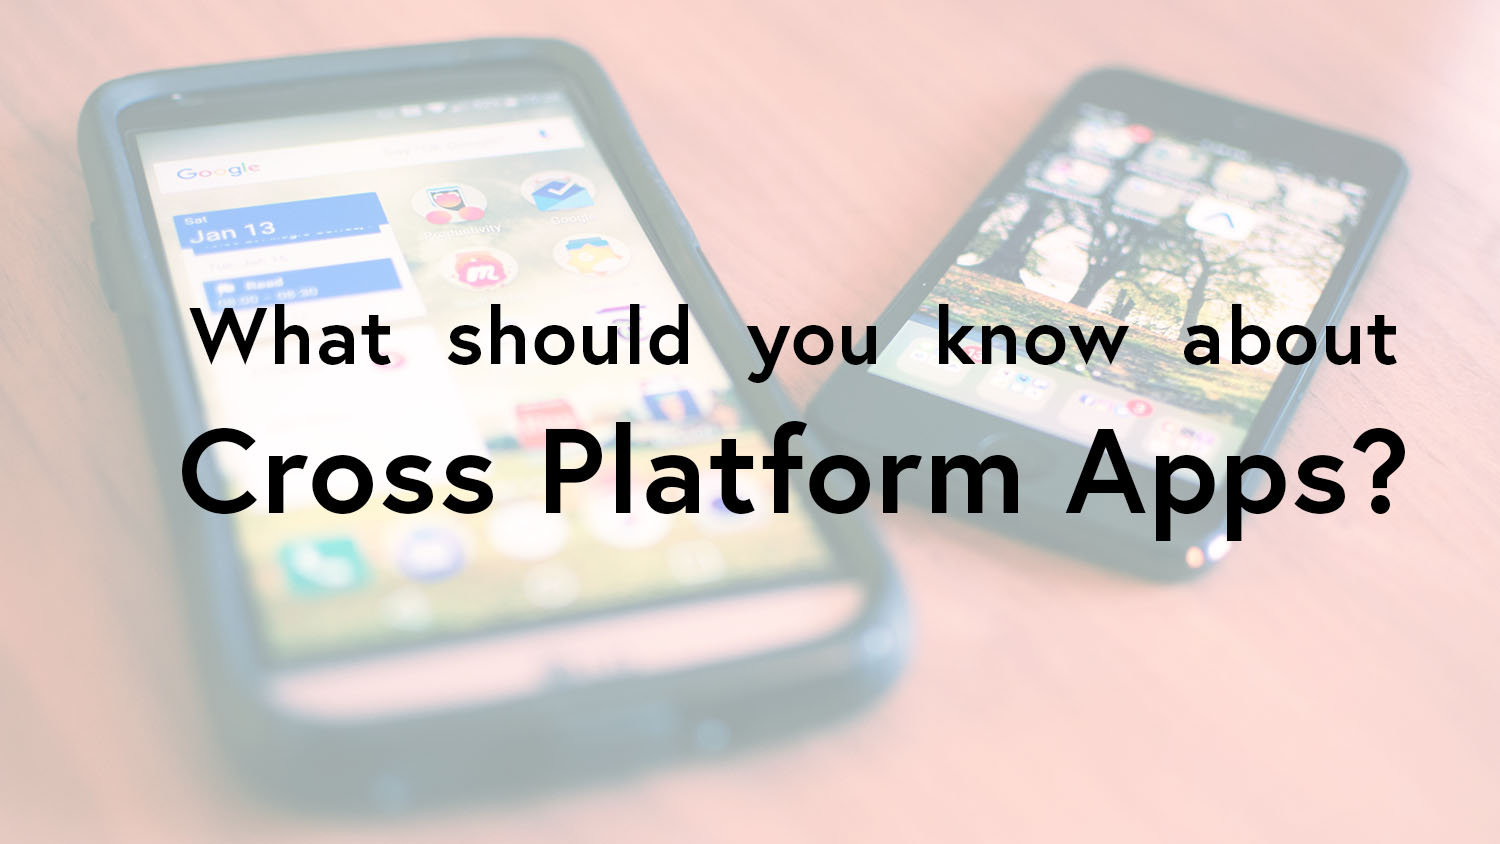 Cross platform apps and what you need to know about them